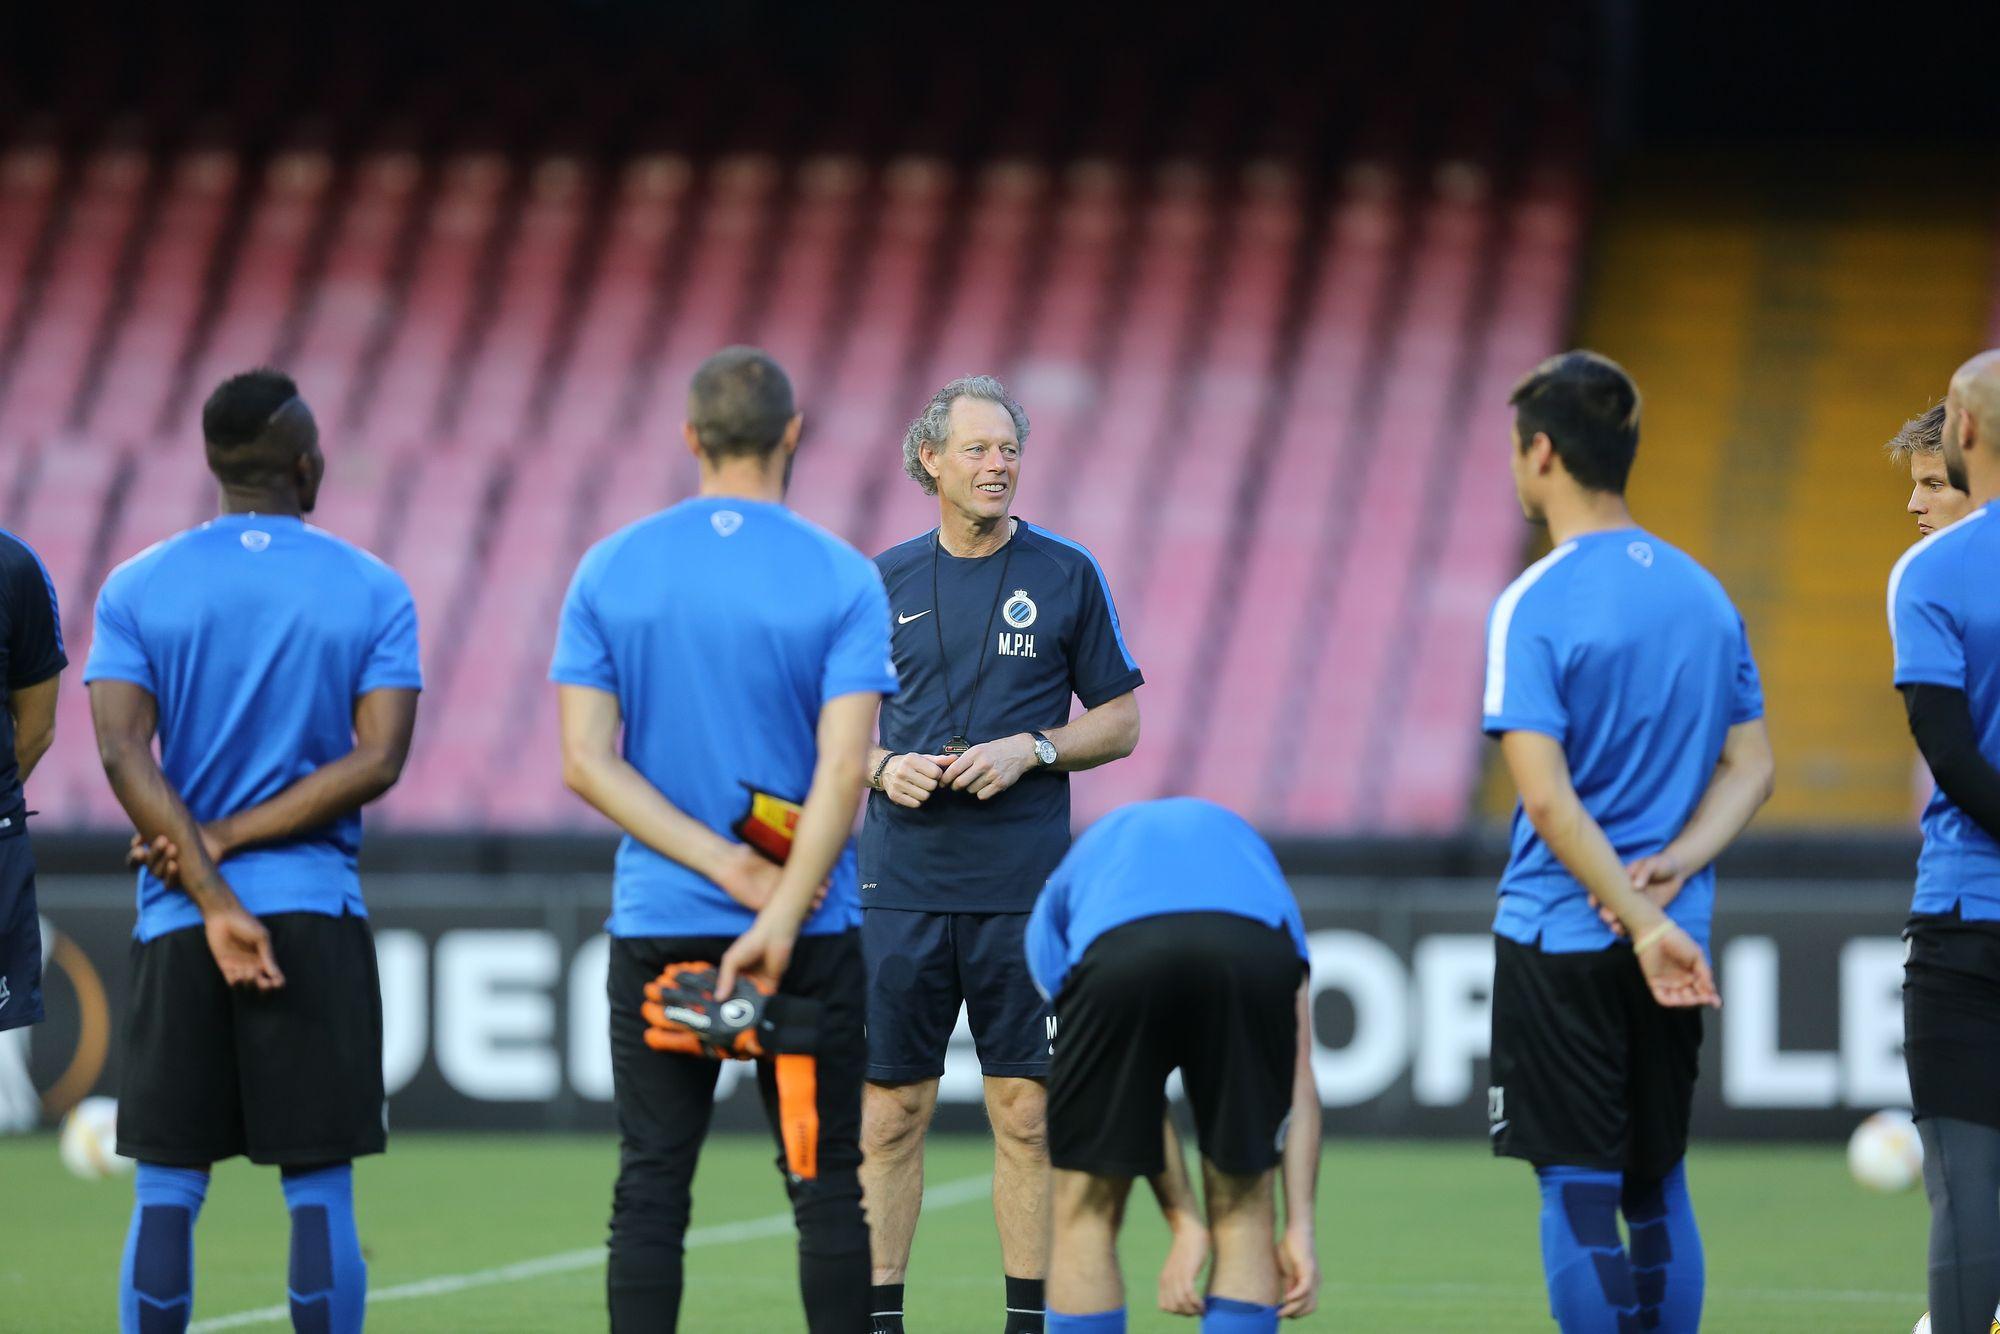 20150916 - NAPLES, ITALY: Club's head coach Michel Preud'homme pictured during a training session in San Paolo stadium in Naples, Italy, Wednesday 16 September 2015. Tomorrow first league soccer club Club Brugge will play the first game in the group stage of the Uefa Europa League competition against Italian club SSC Napoli, in the group D. BELGA PHOTO BRUNO FAHY